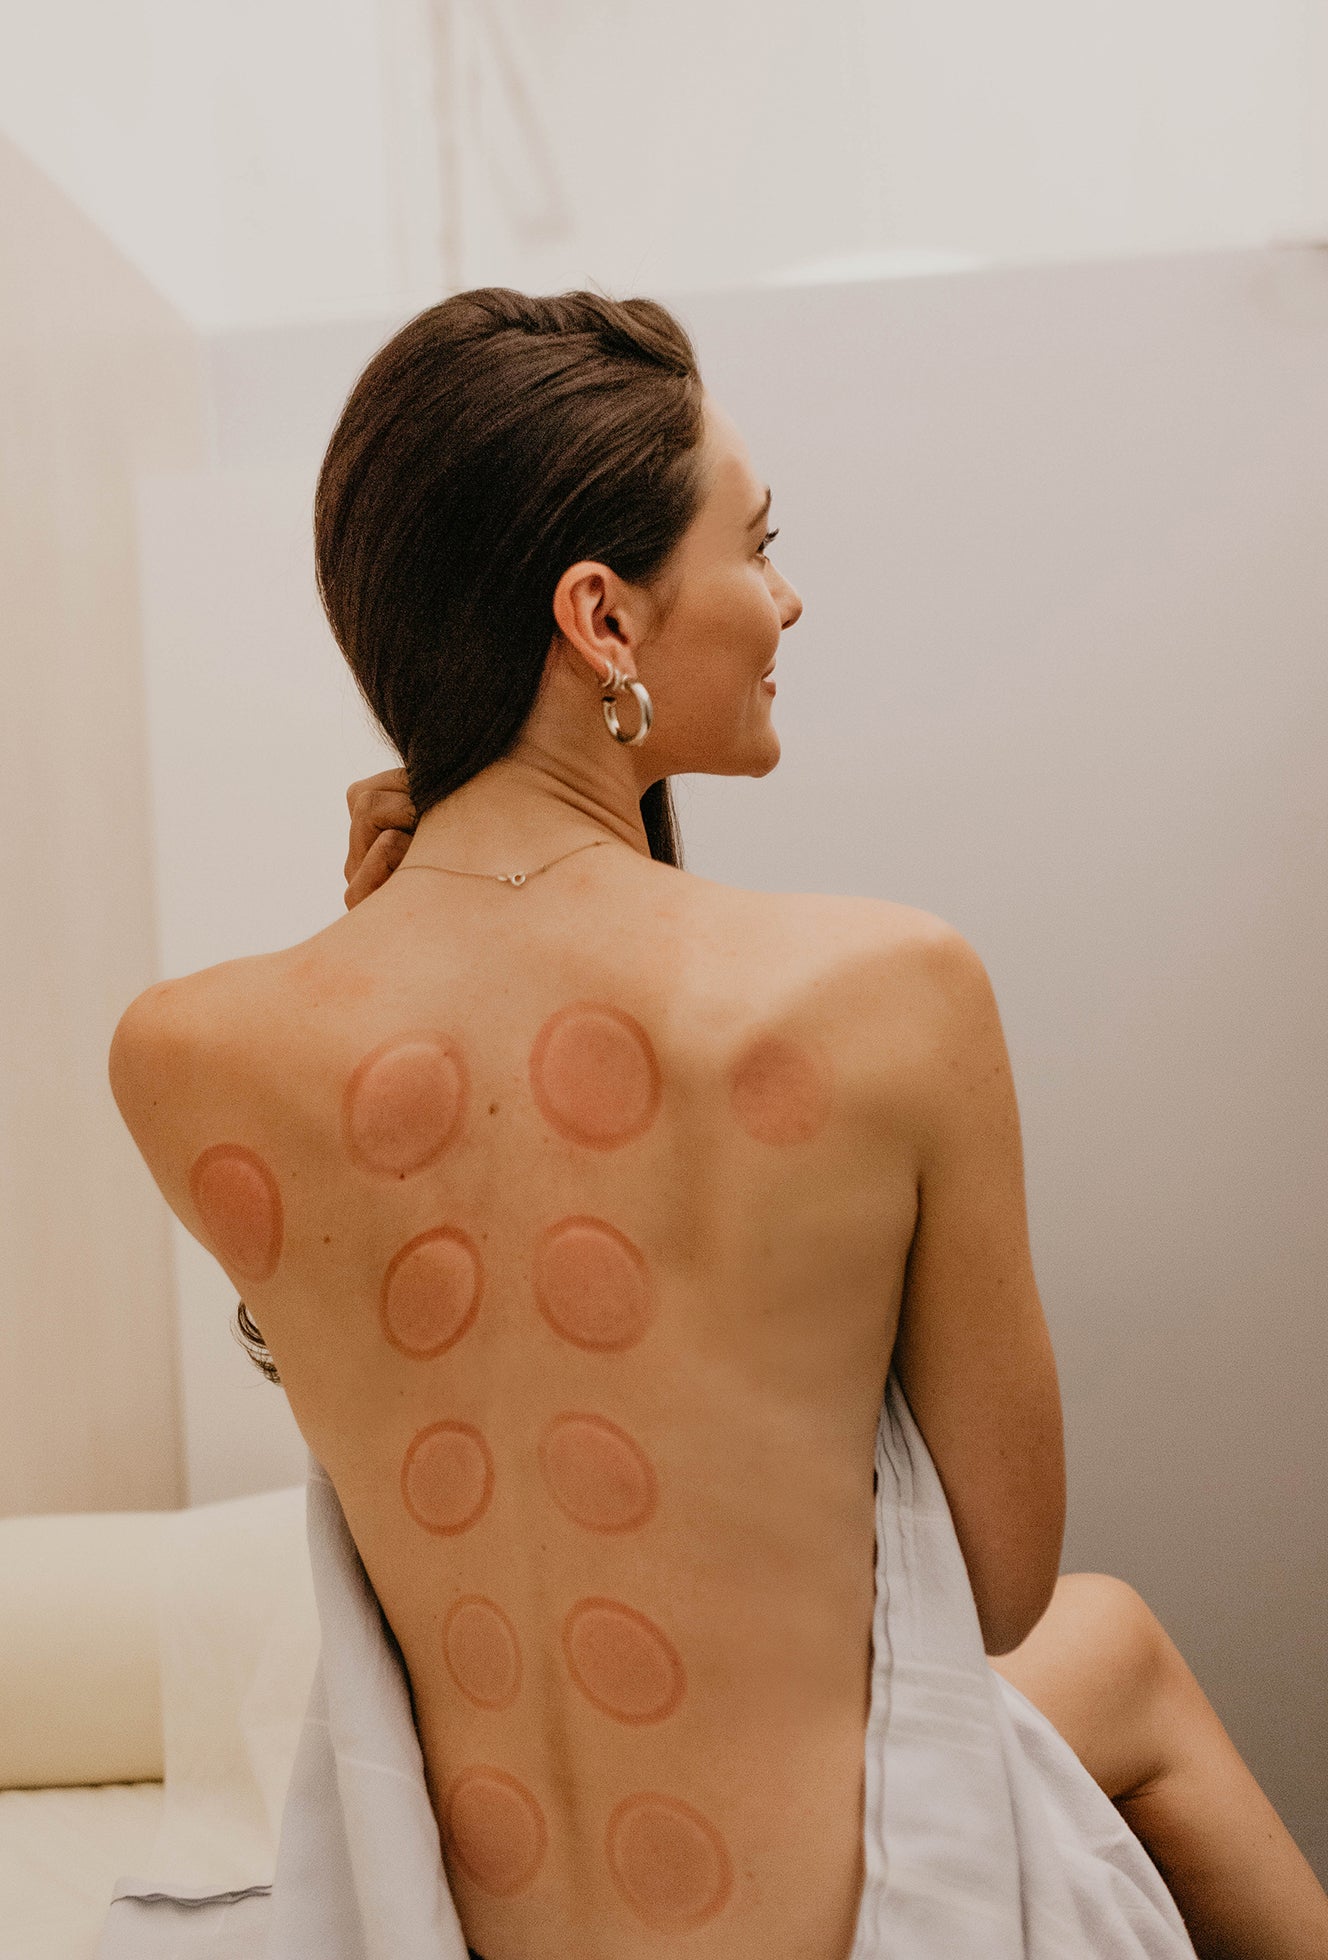 Cupping Therapy Costs: What to Expect